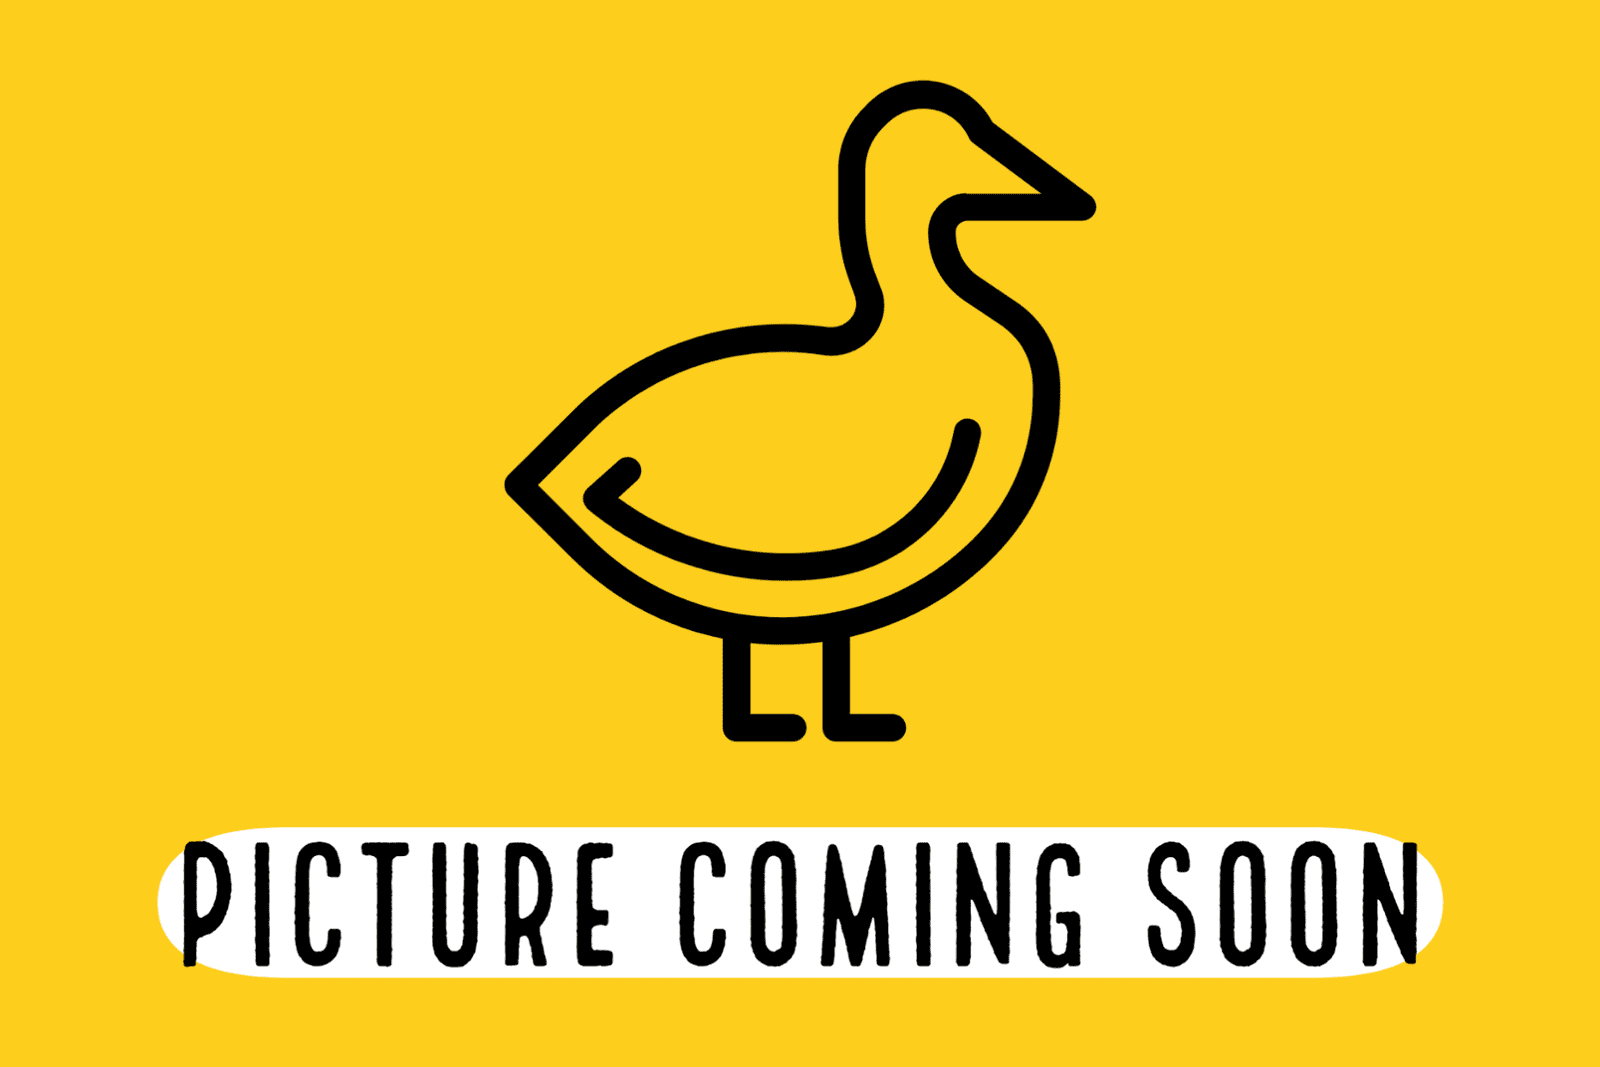 A black cartoon outline duck on a bright yellow background that says "picture coming soon"